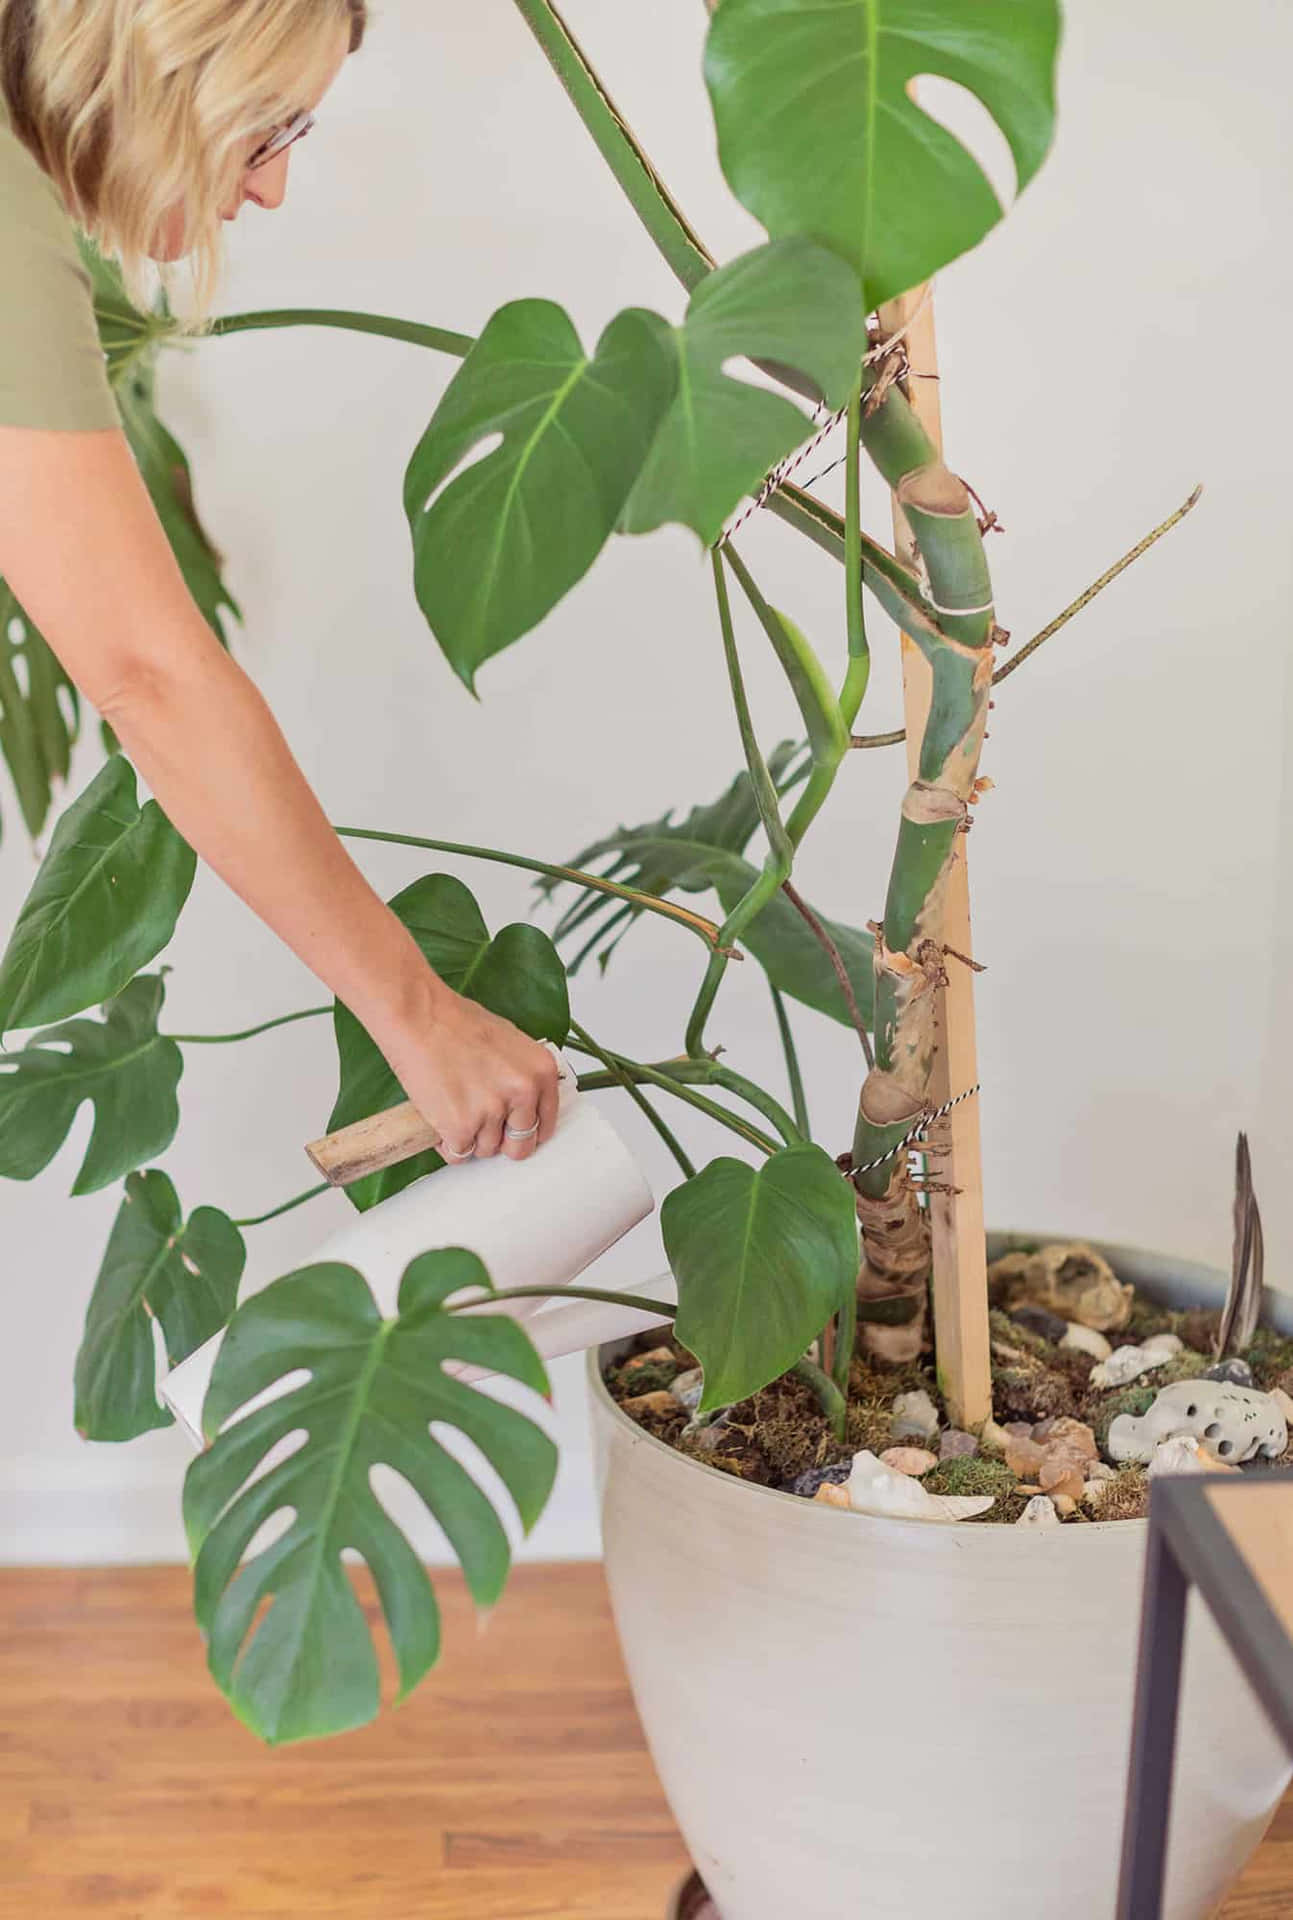 A lush and vibrant Monstera plant spreads its remarkable leaves and provides a calming presence.